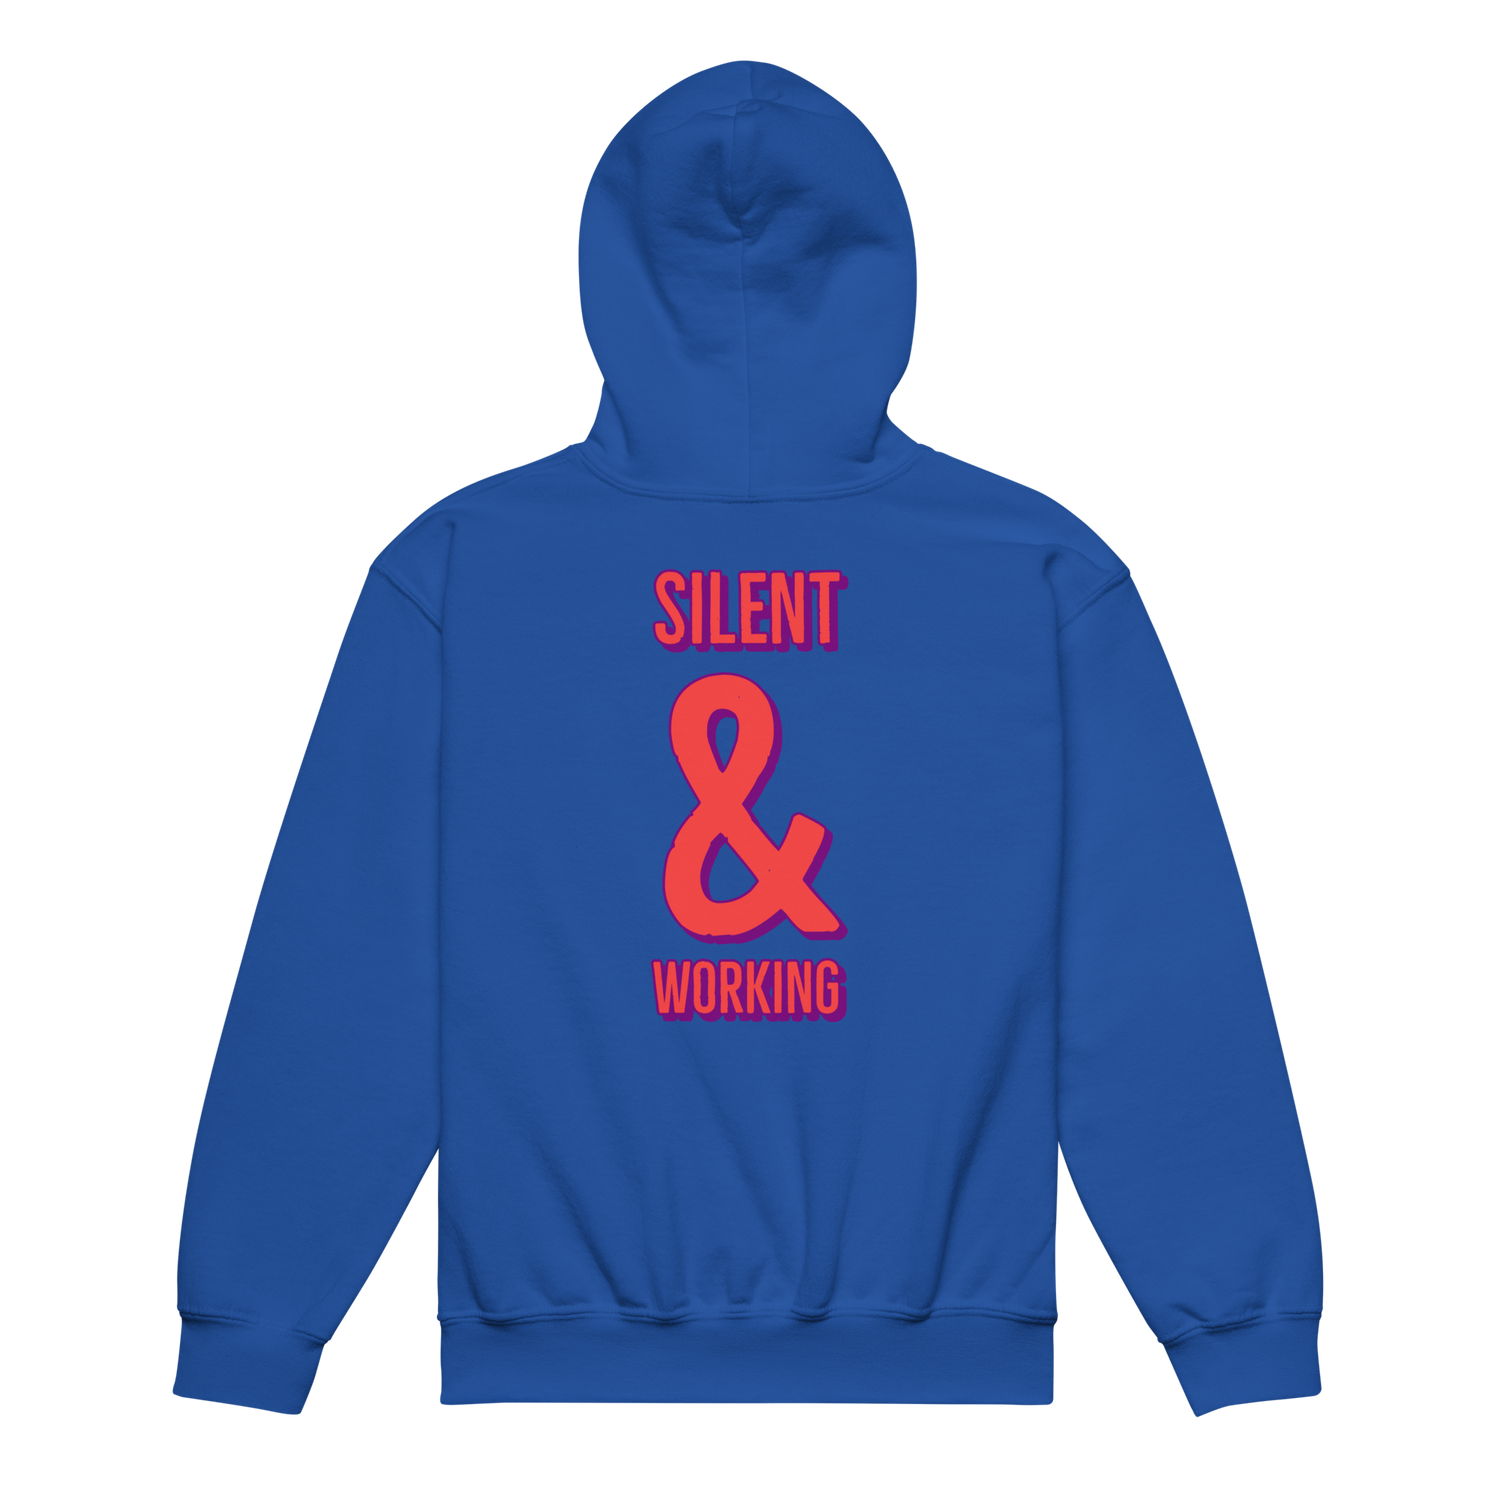 Silent and Working Youth Sweatshirt